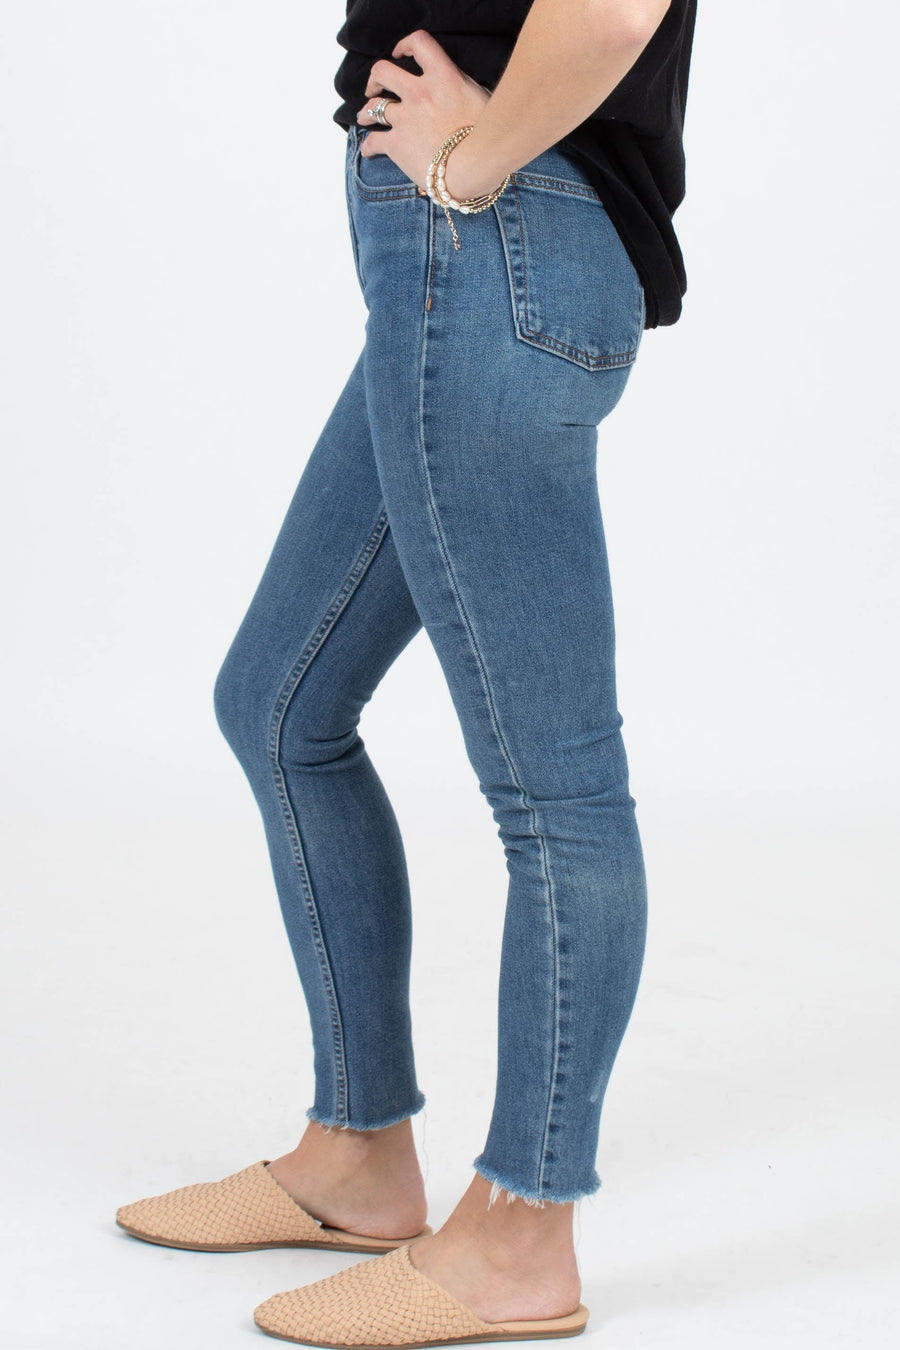 RE/DONE Clothing XS | US 25 "High Rise Ankle Crop" Jeans